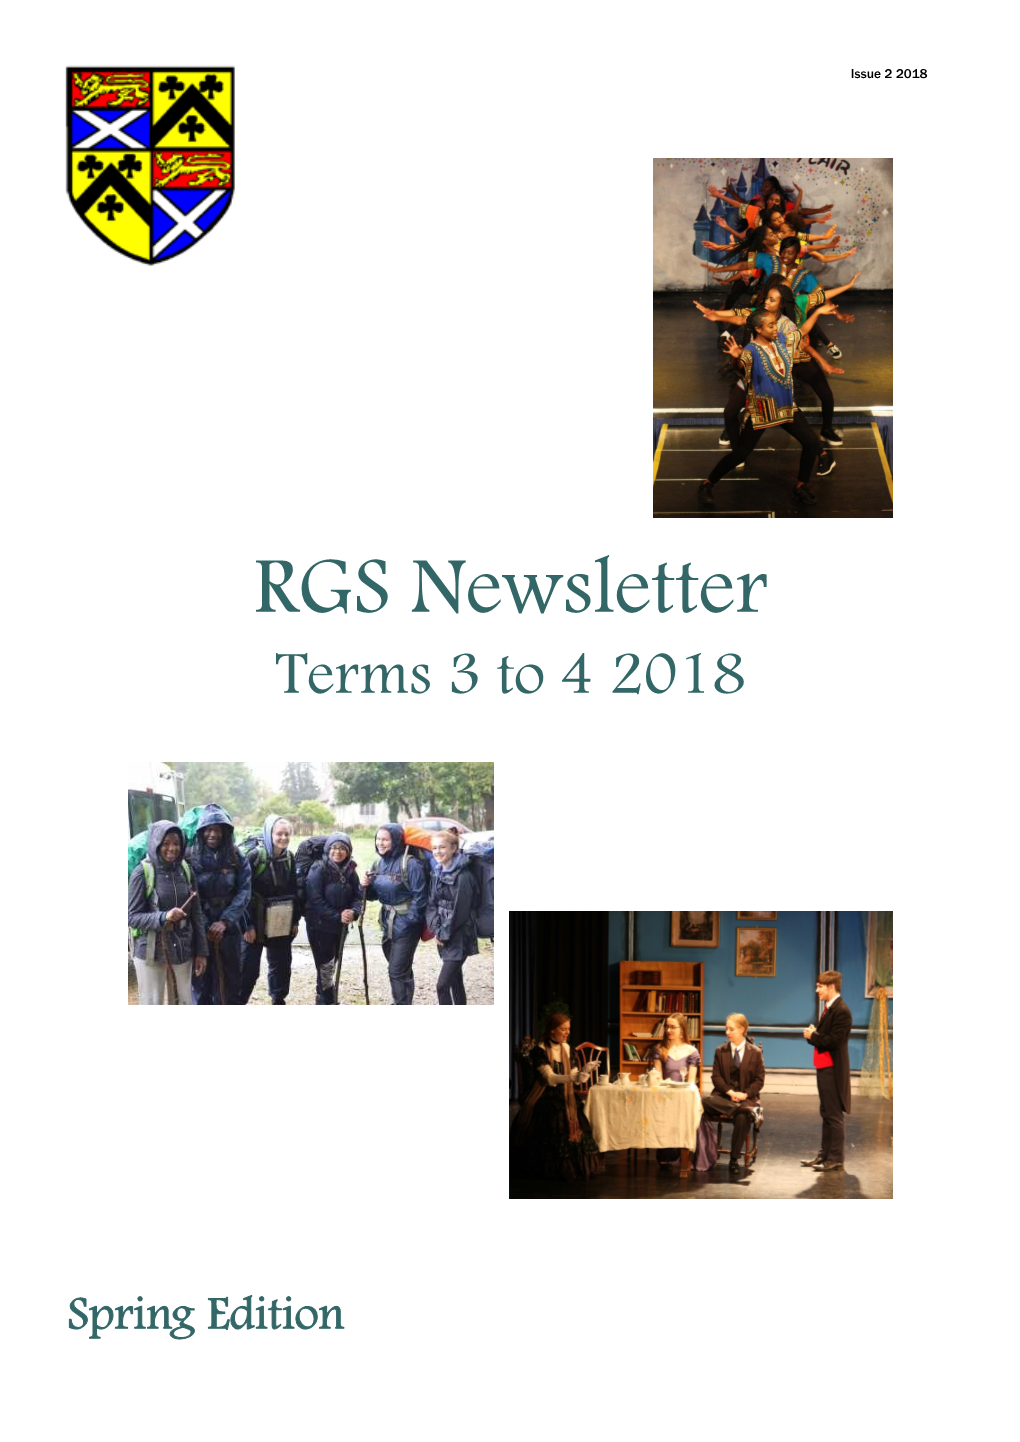 RGS Newsletter Terms 3 to 4 2018